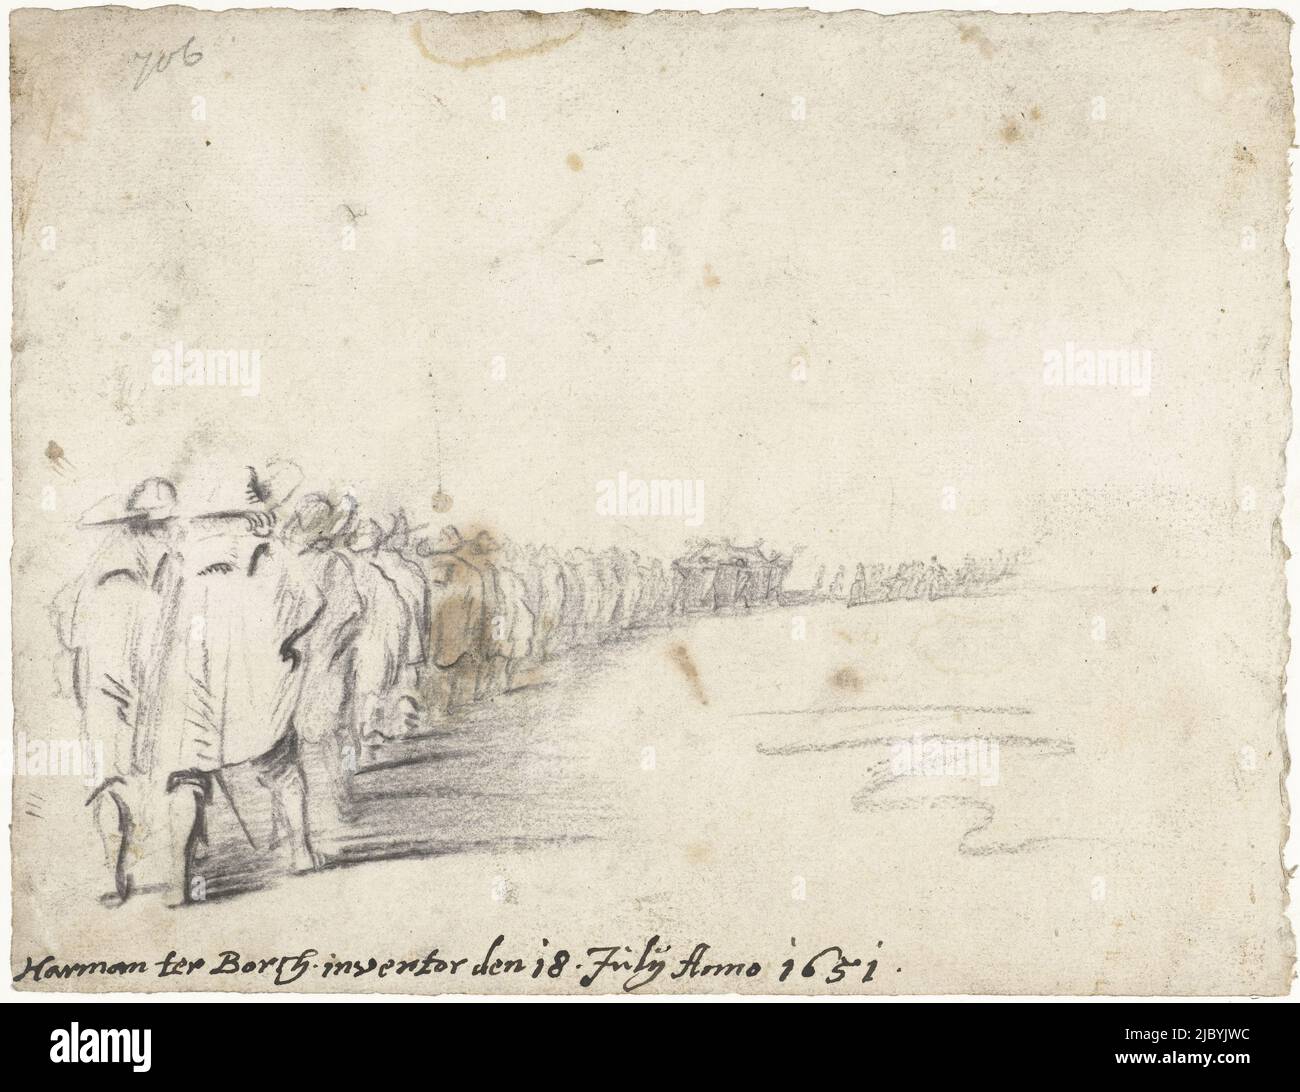 Funeral procession, Harmen ter Borch, 1651, Funeral procession consisting of mourners following a bier; in front a barely distinguishable line of horsemen., draughtsman: Harmen ter Borch, (mentioned on object), Zwolle, 18-Jul-1651, paper, h 164 mm × w 214 mm Stock Photo